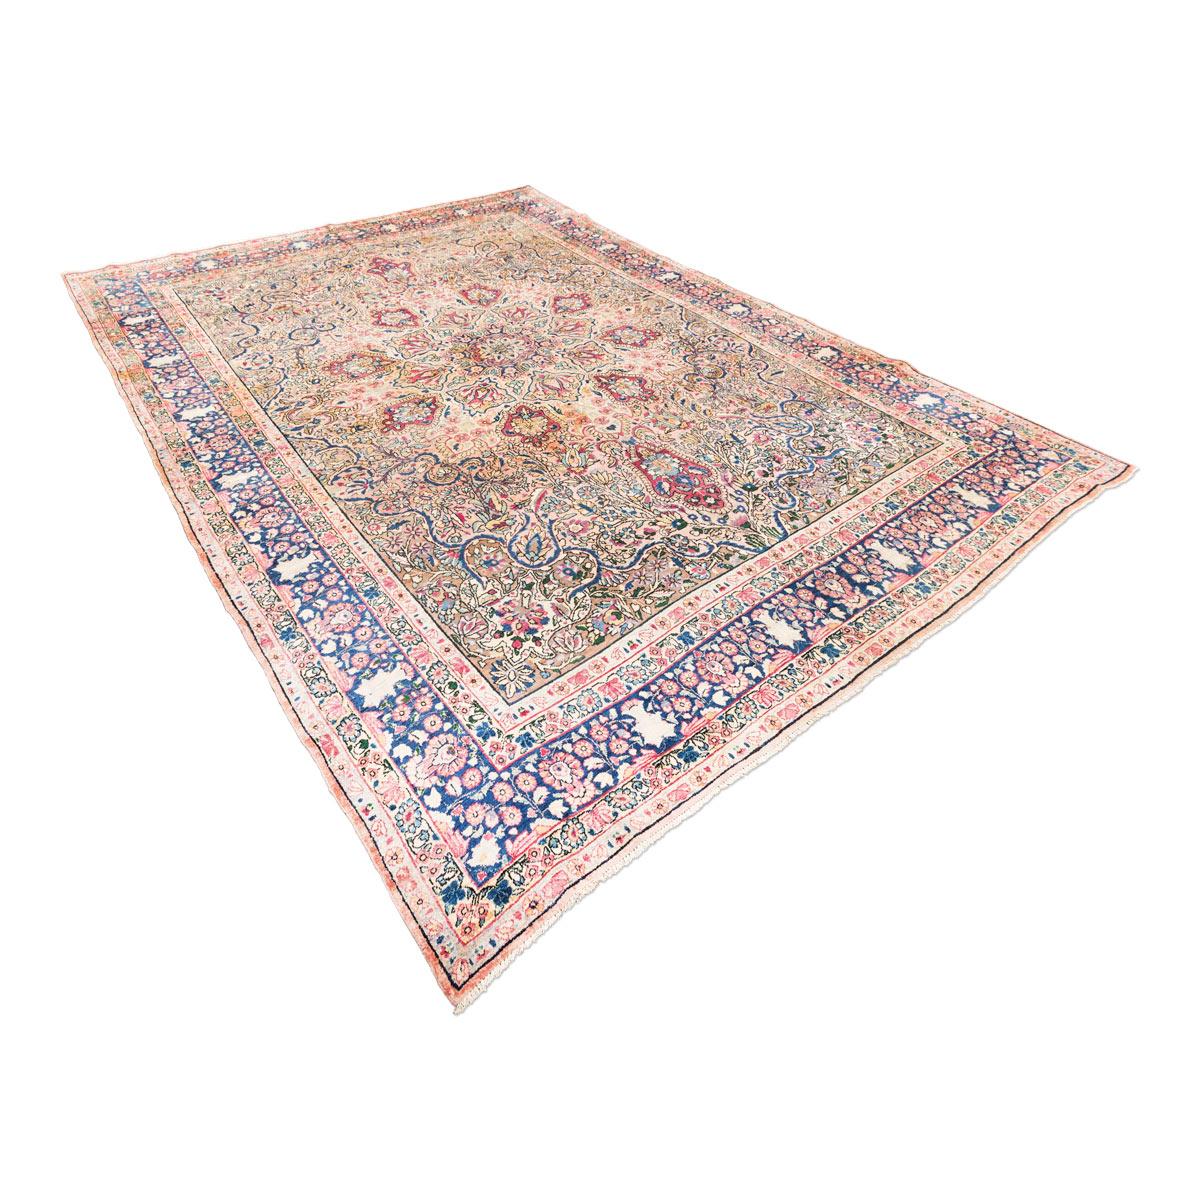 Asian Wool Handmade Kirman Rug Classic Flowers, Leaves and Branches Design. For Sale